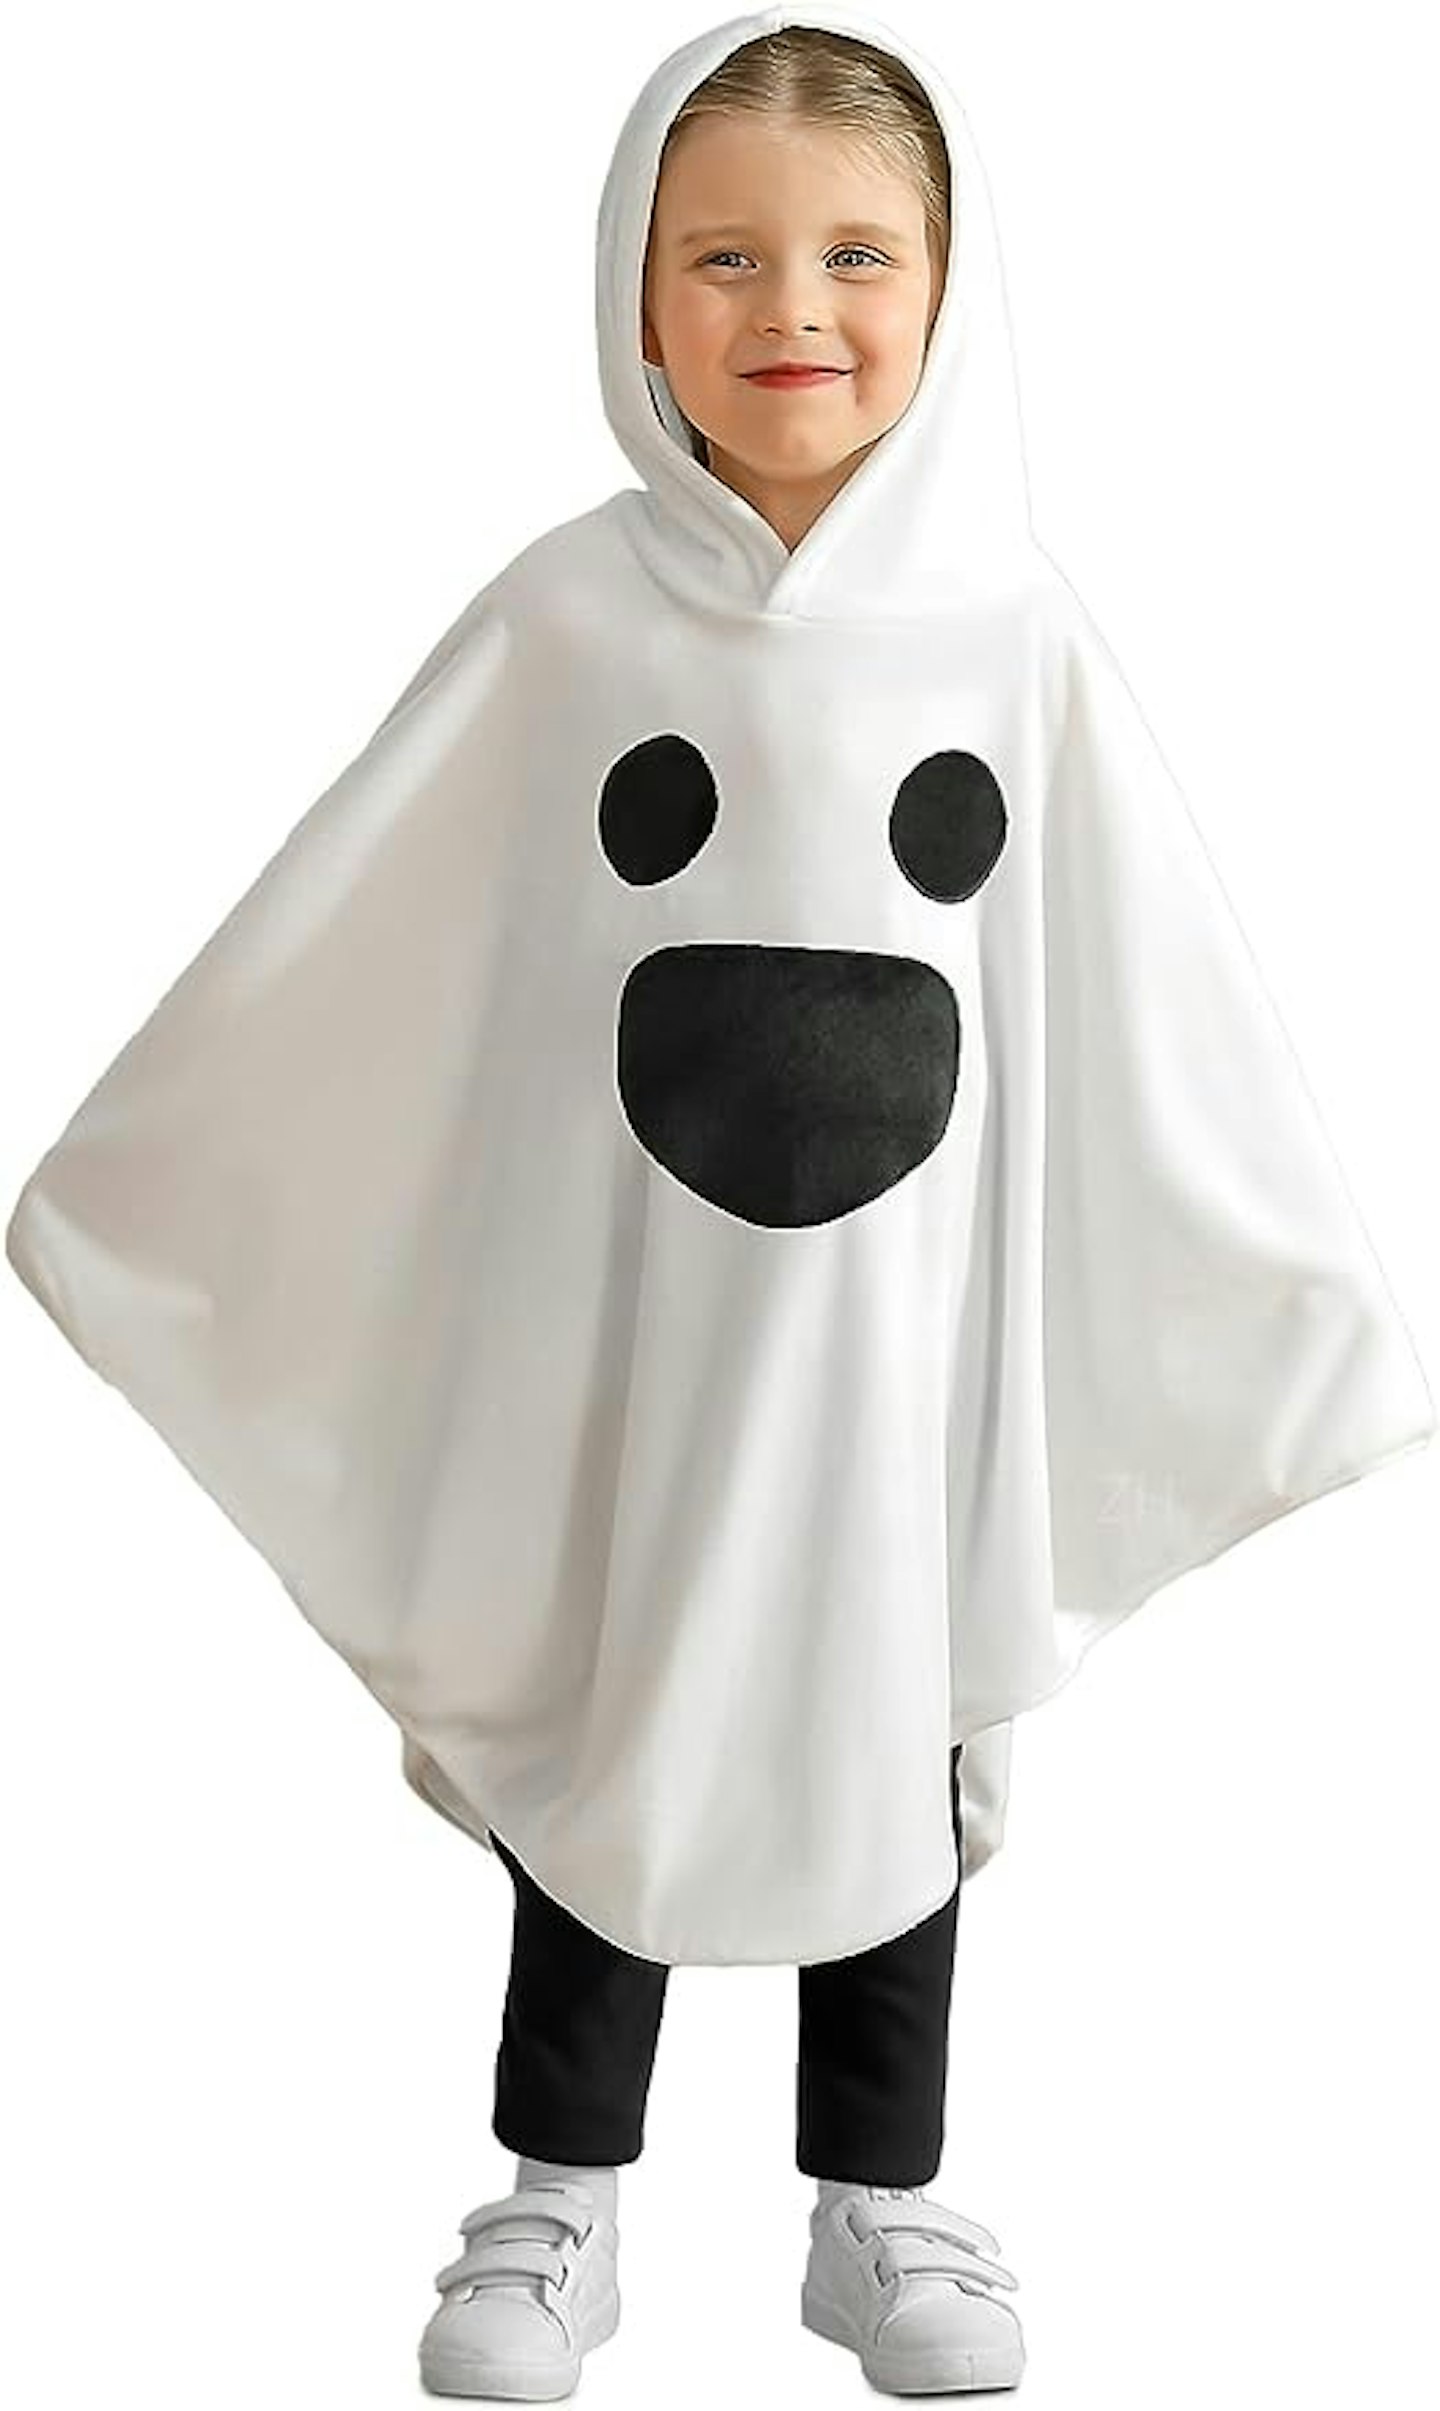 Toddler ghost costume